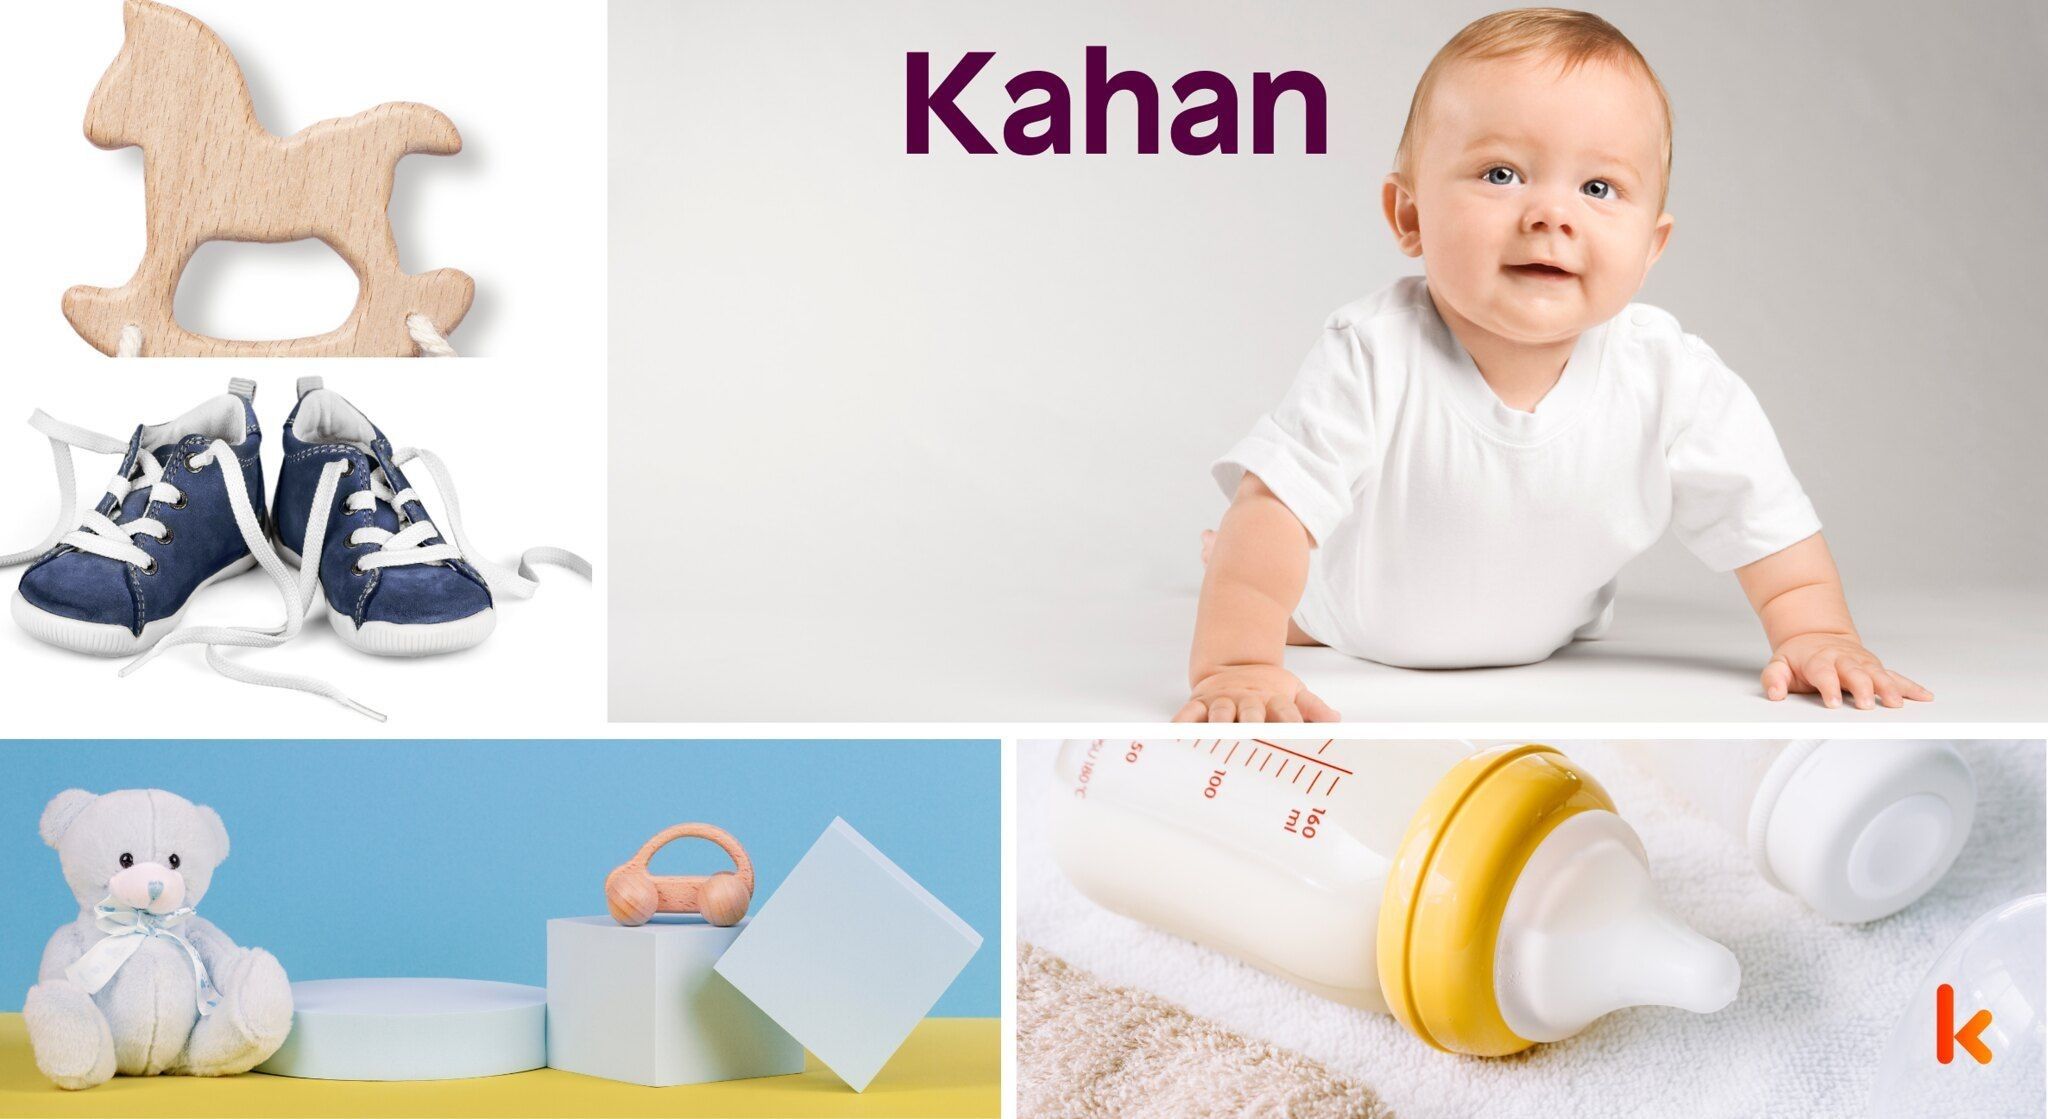 Meaning of the name Kahan